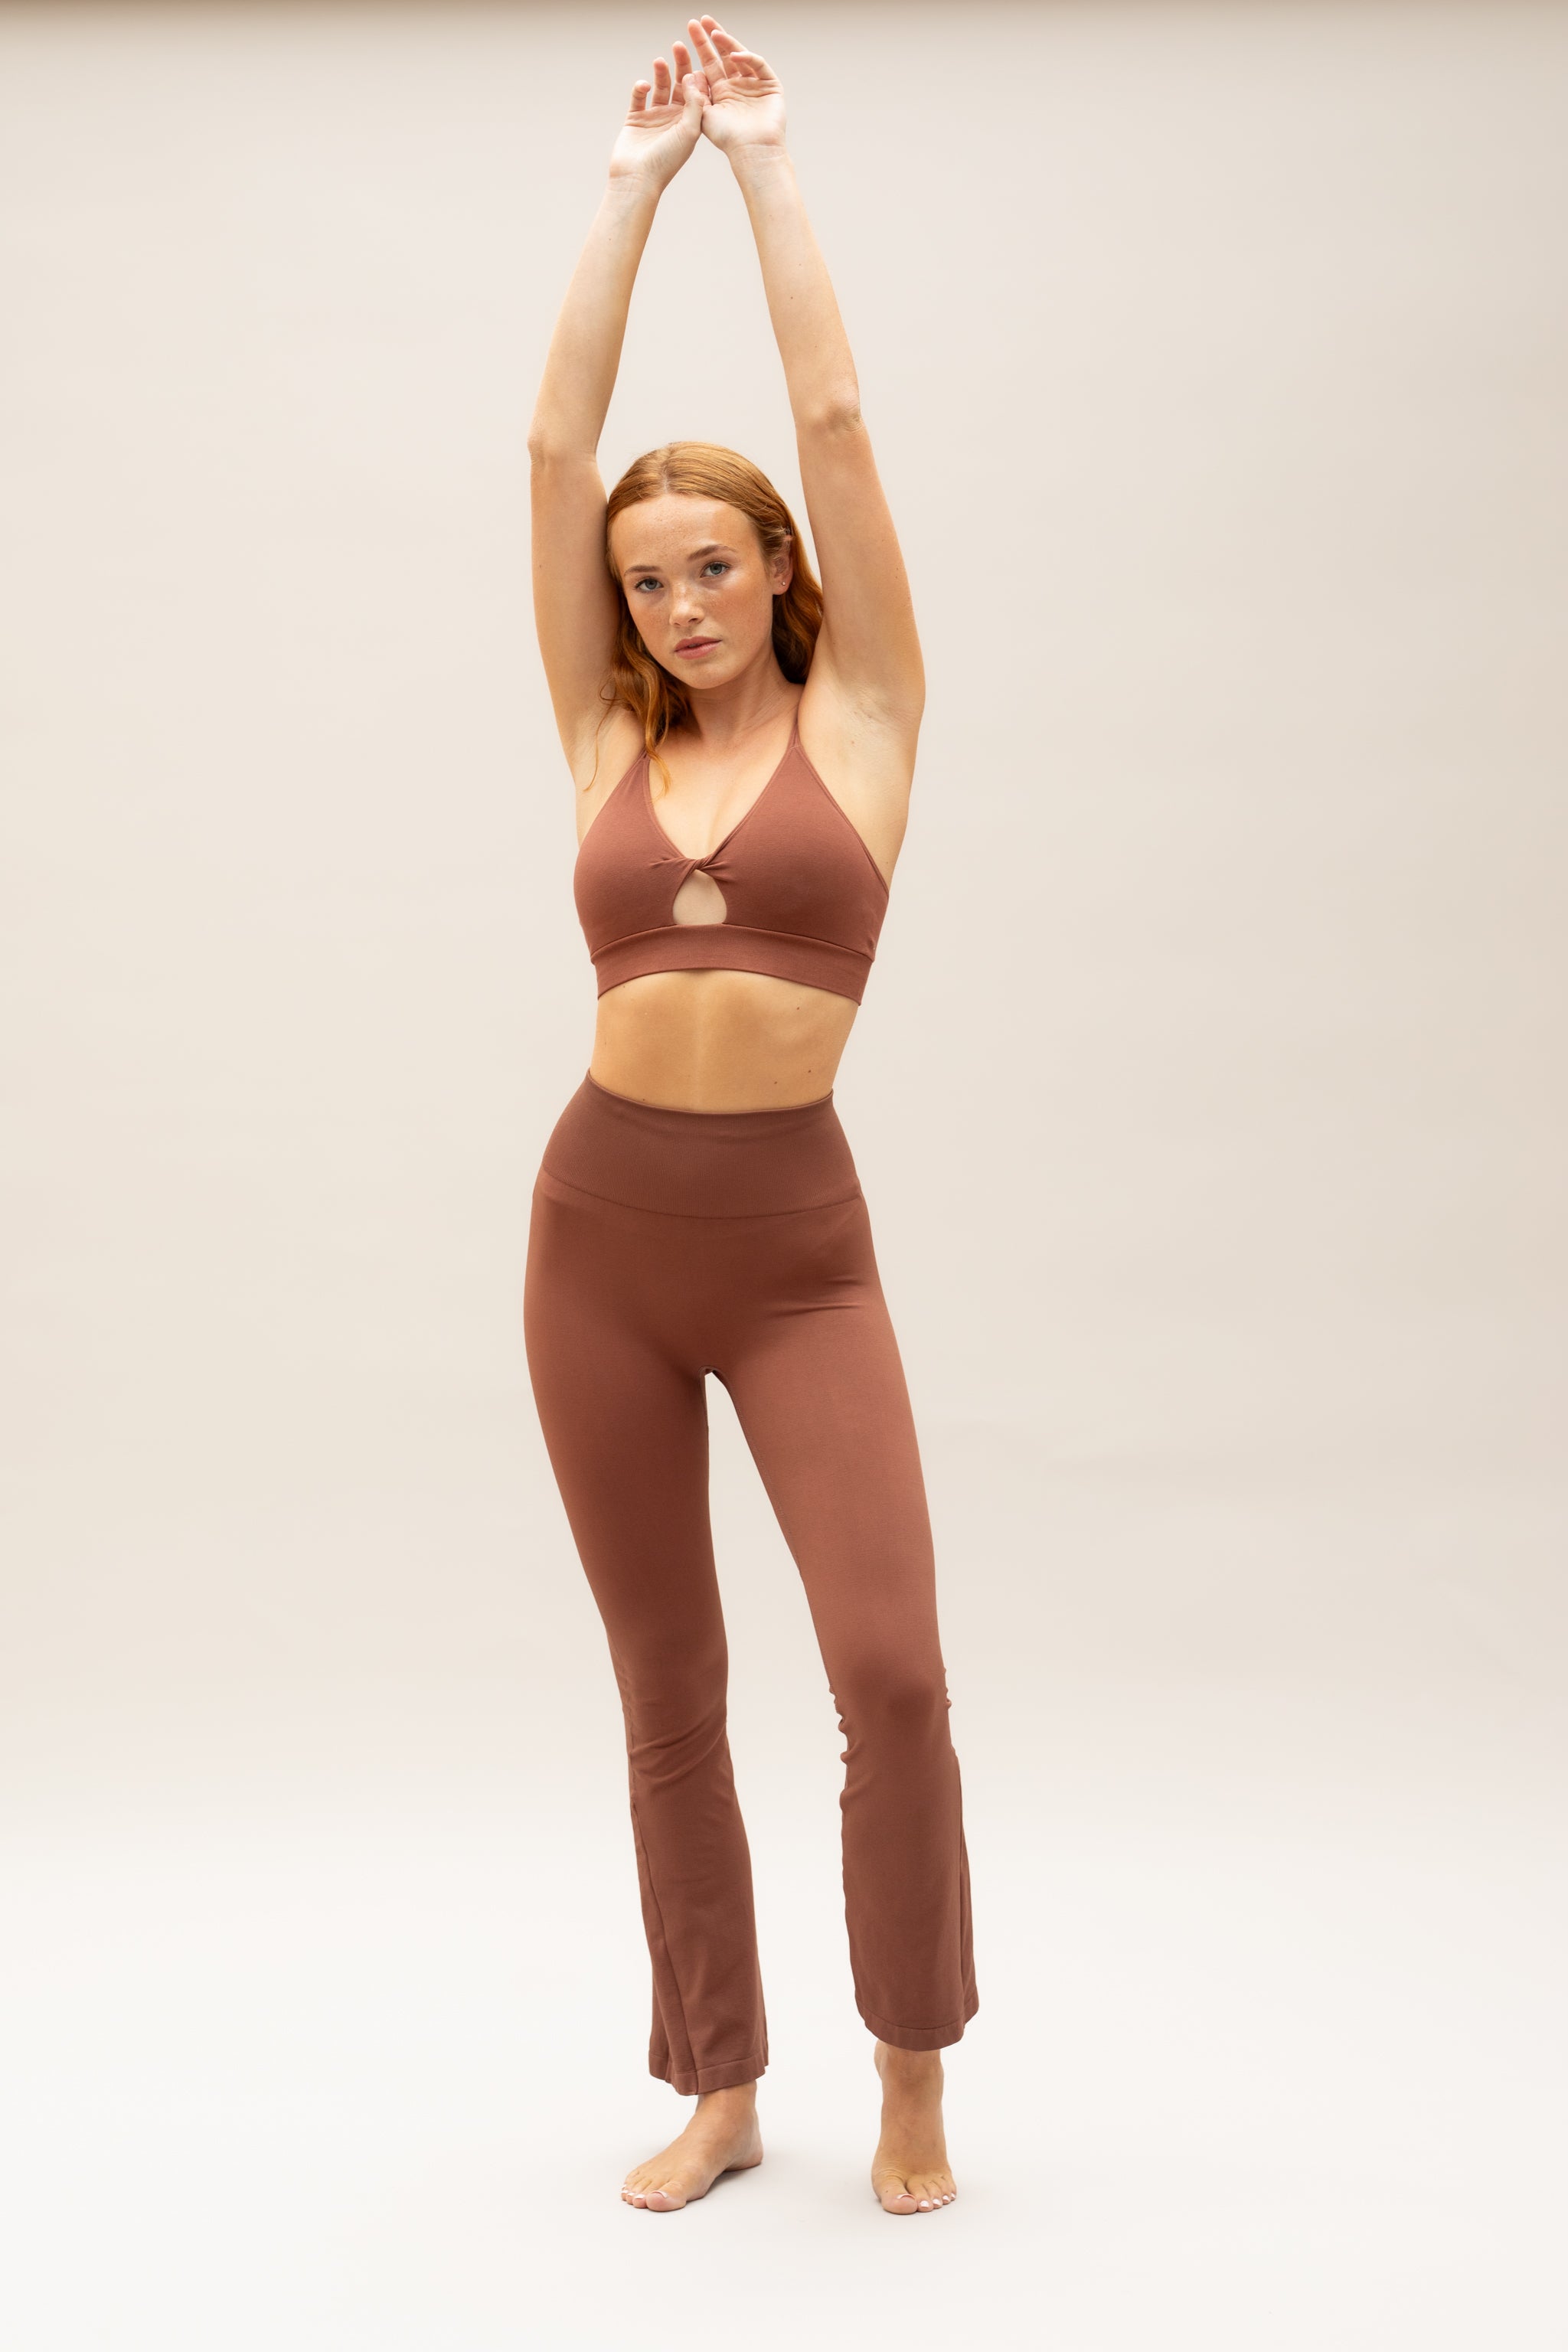 Cinnamon flare leggings with Cinnamon supportive sports bra by sustainable women's activewear brand, Jilla.